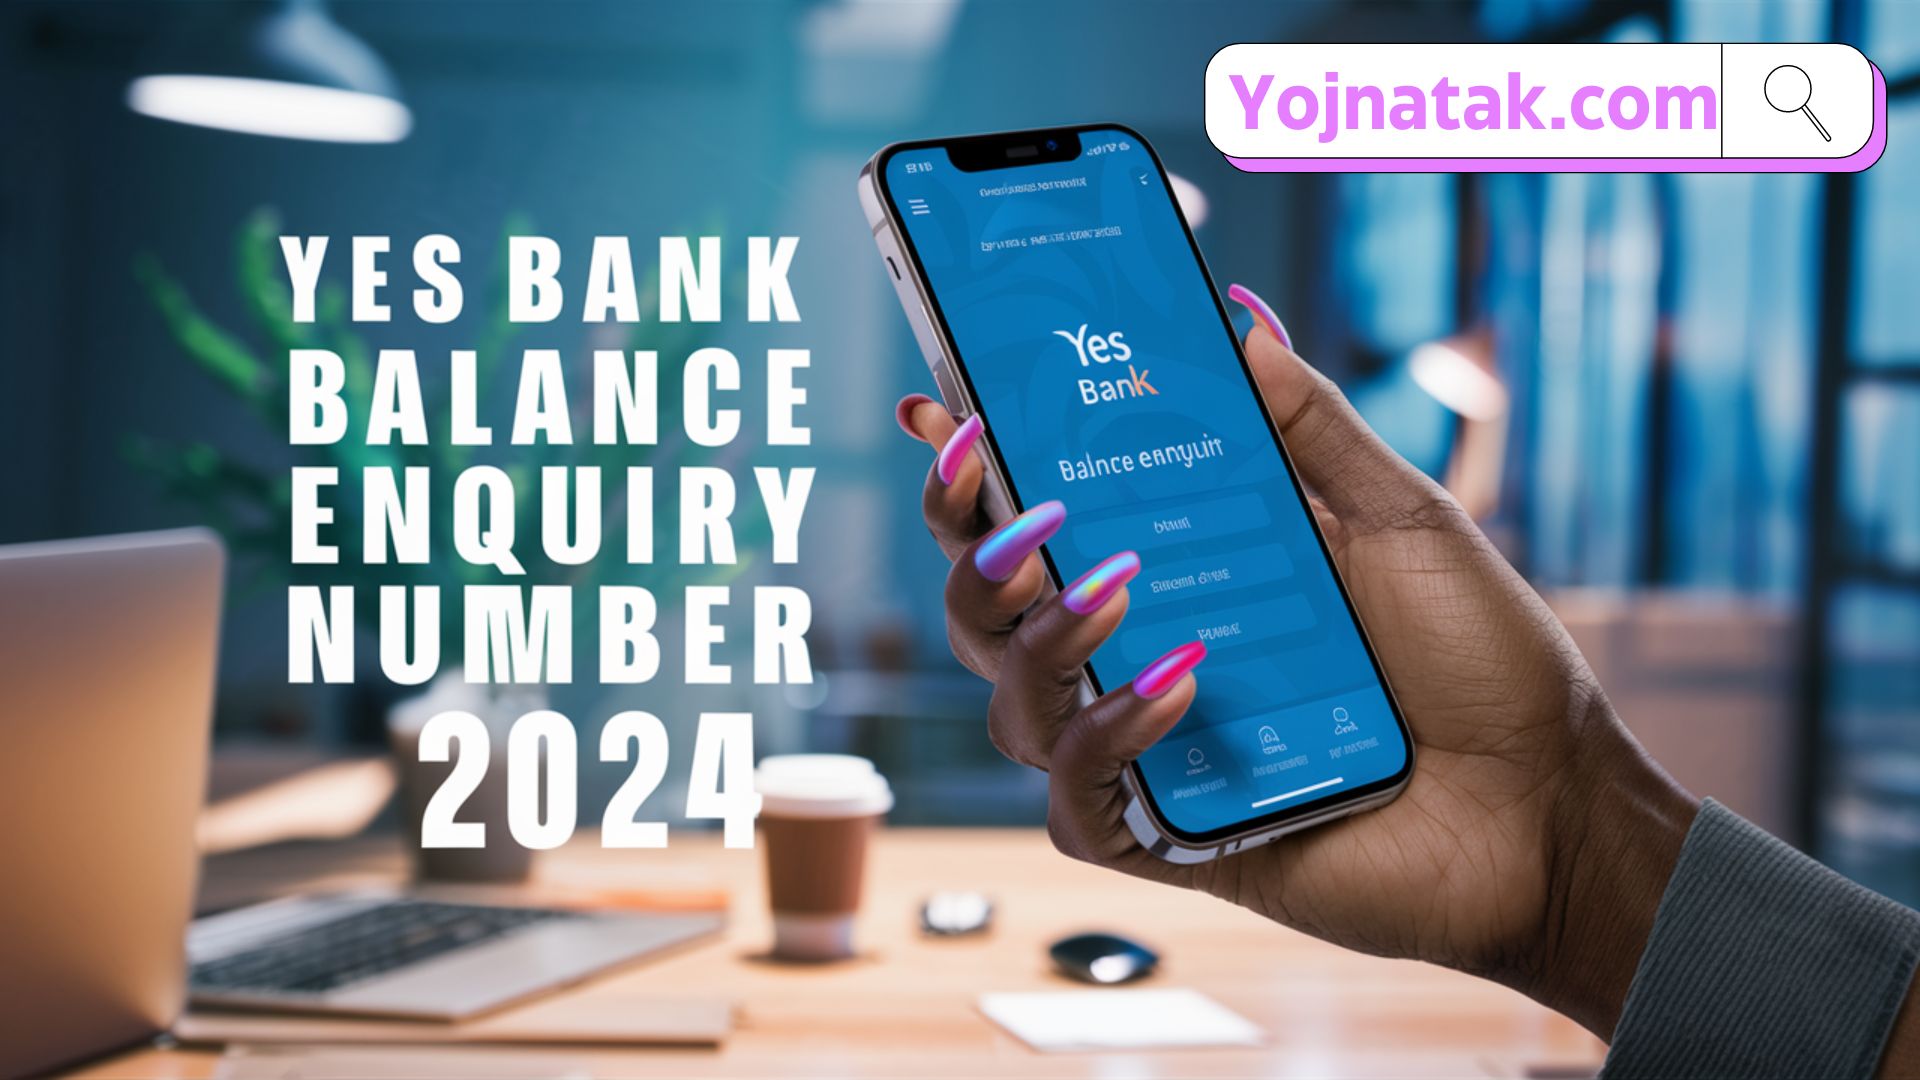 Yes Bank Balance Enquiry Number 2024